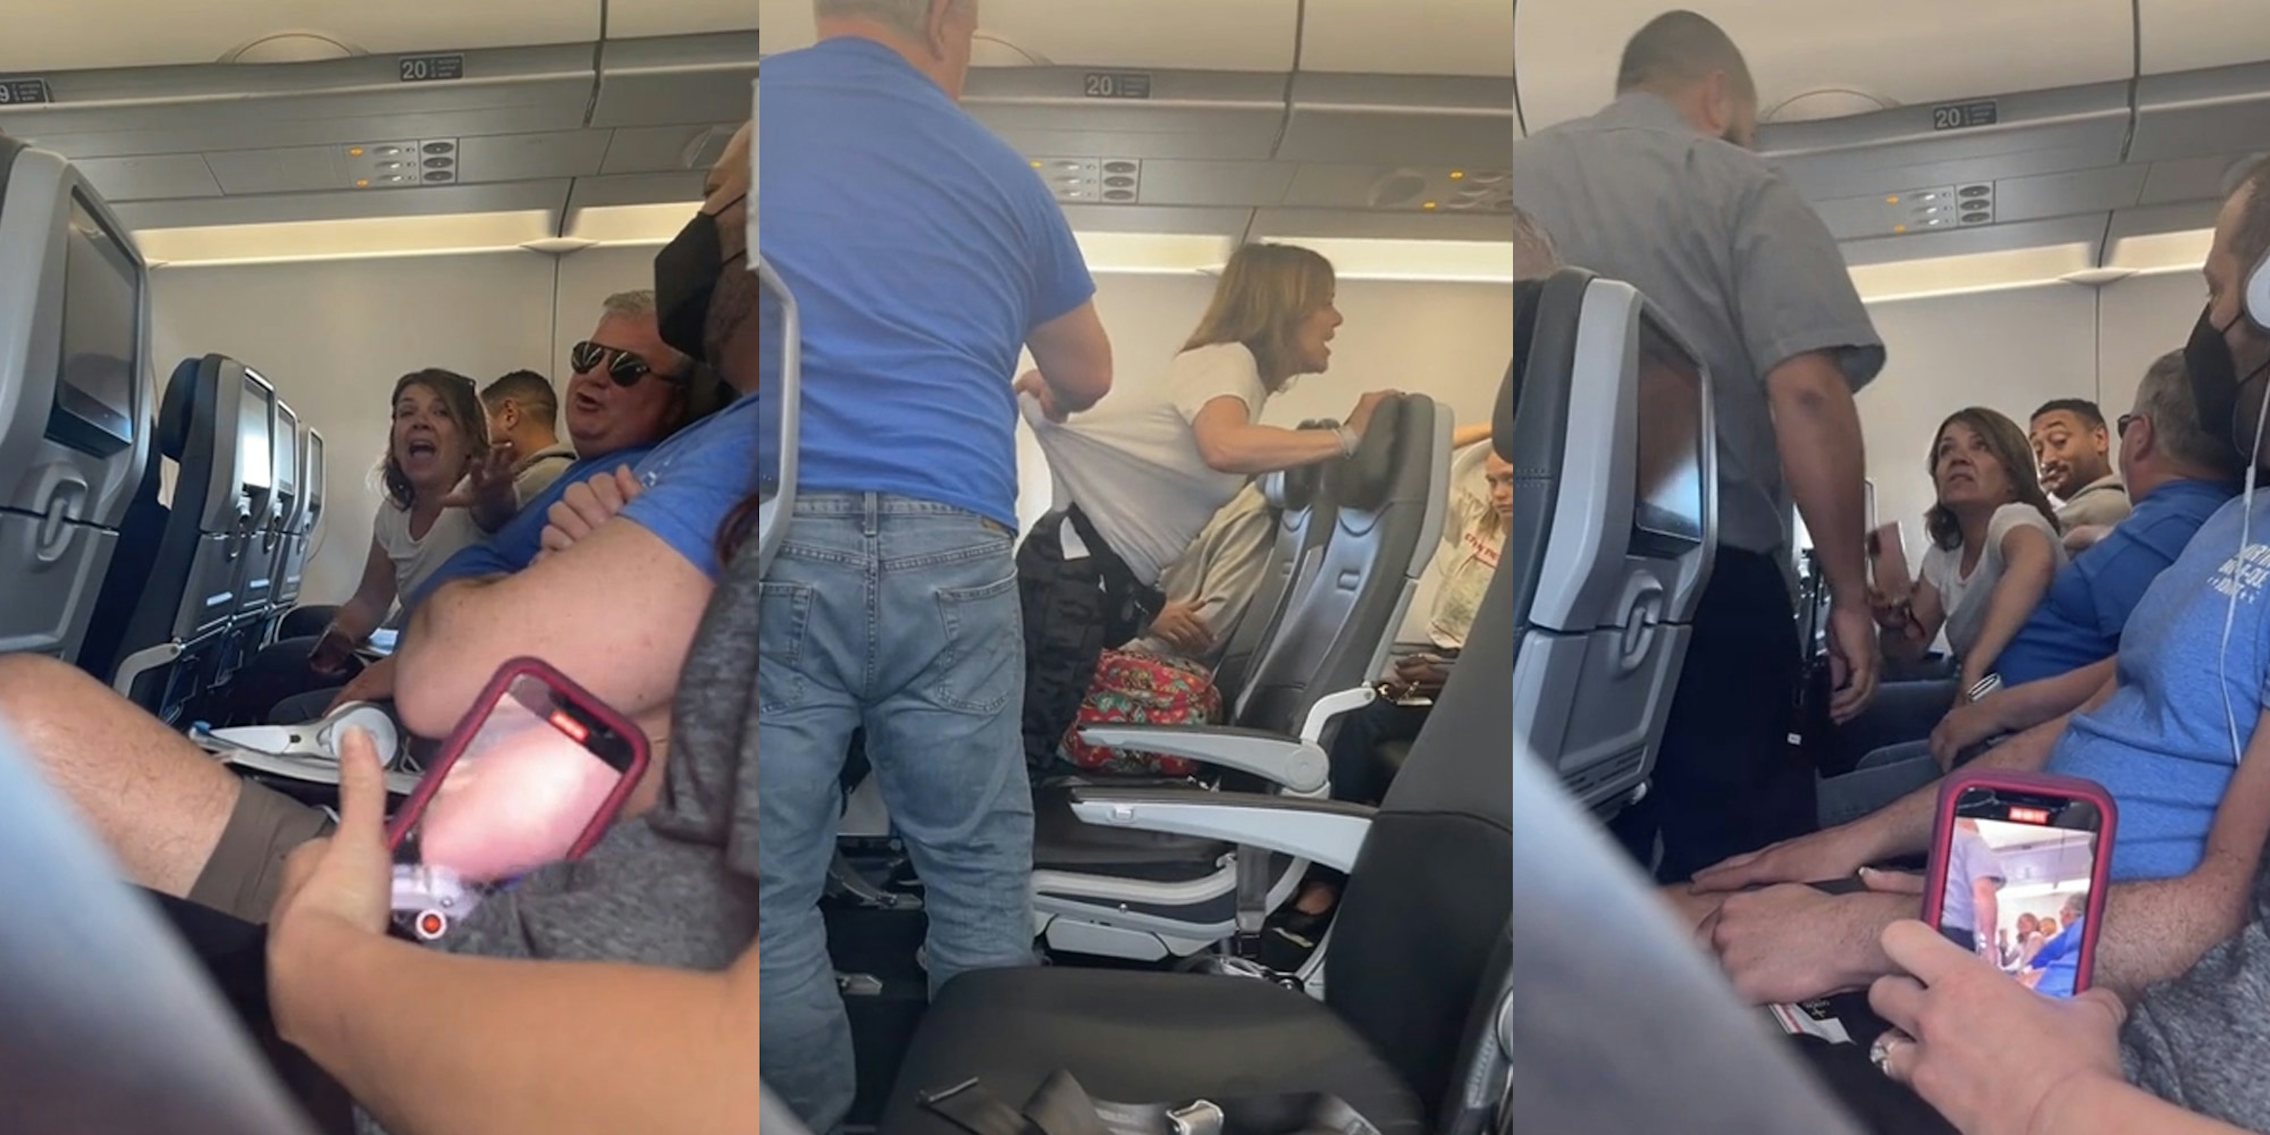 Woman yelling while passengers record her in plane (l) Man holding woman back by her shirt pulling it in plane (c)plane seating A different man standing near woman while passengers record her (r)